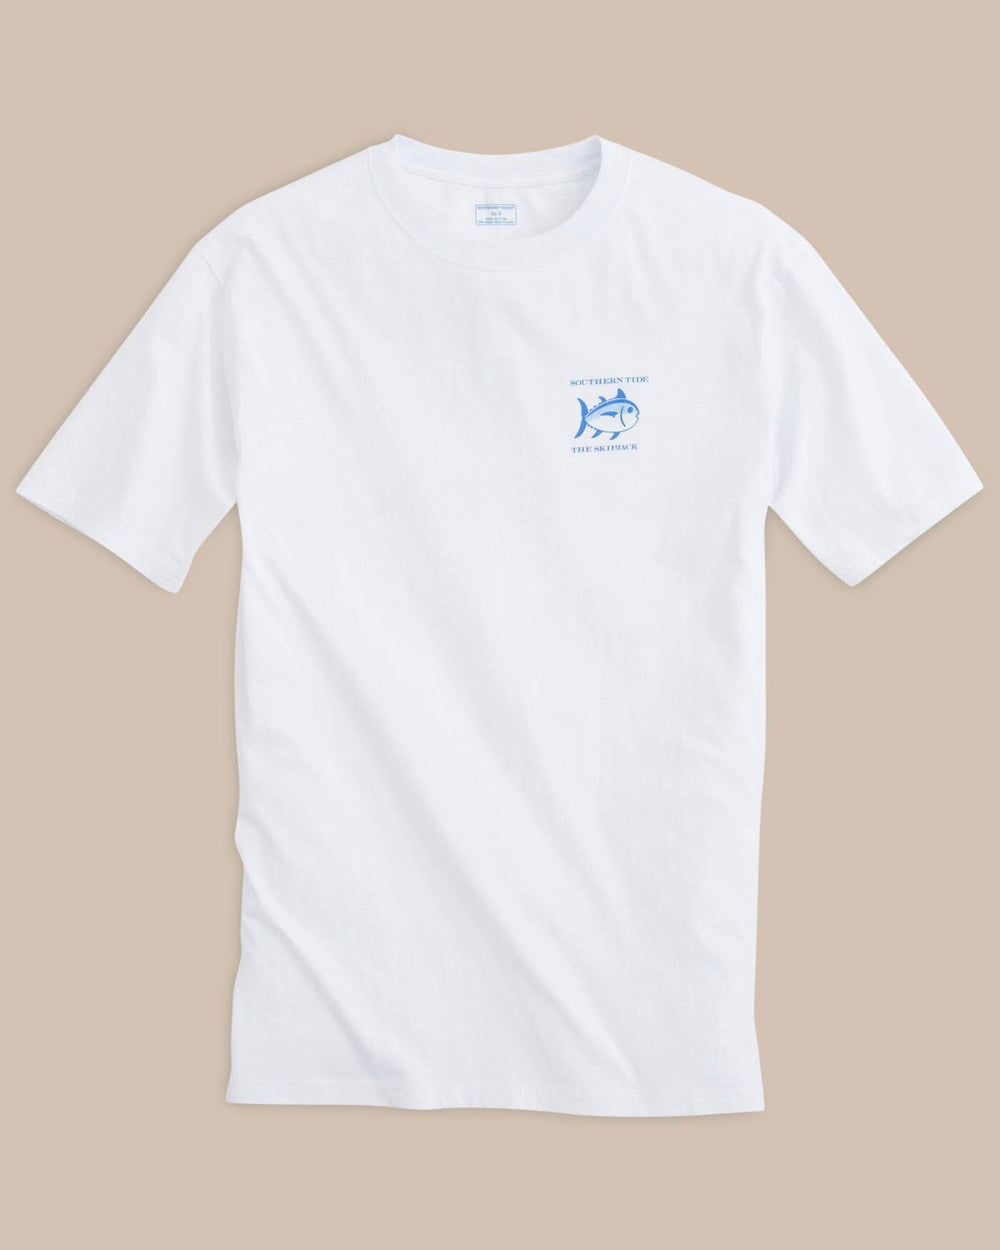 The front view of the Men's White Original Skipjack Short Sleeve T-Shirt by Southern Tide - White